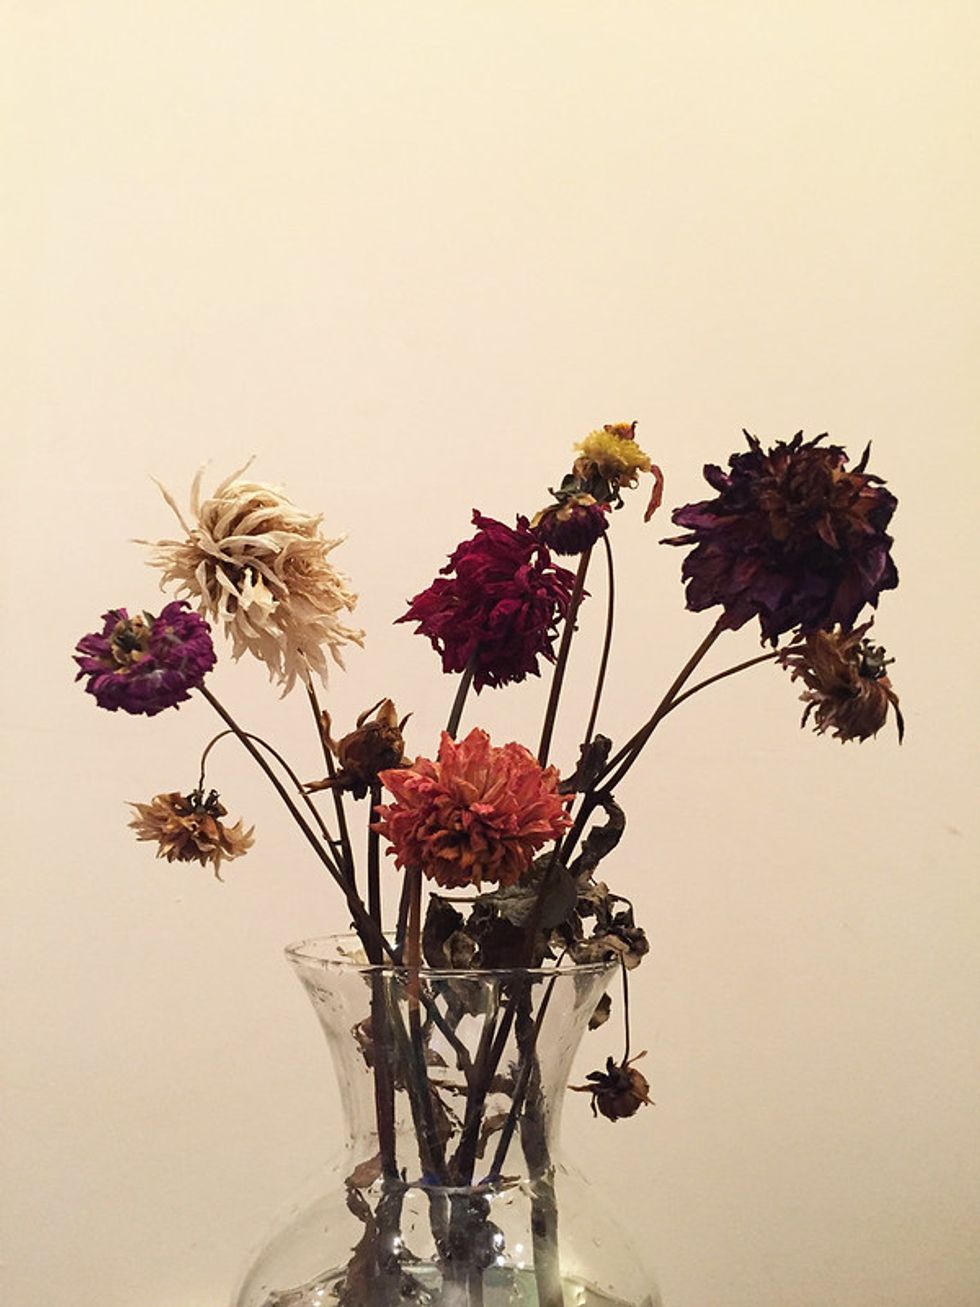 A vase of dead flowers